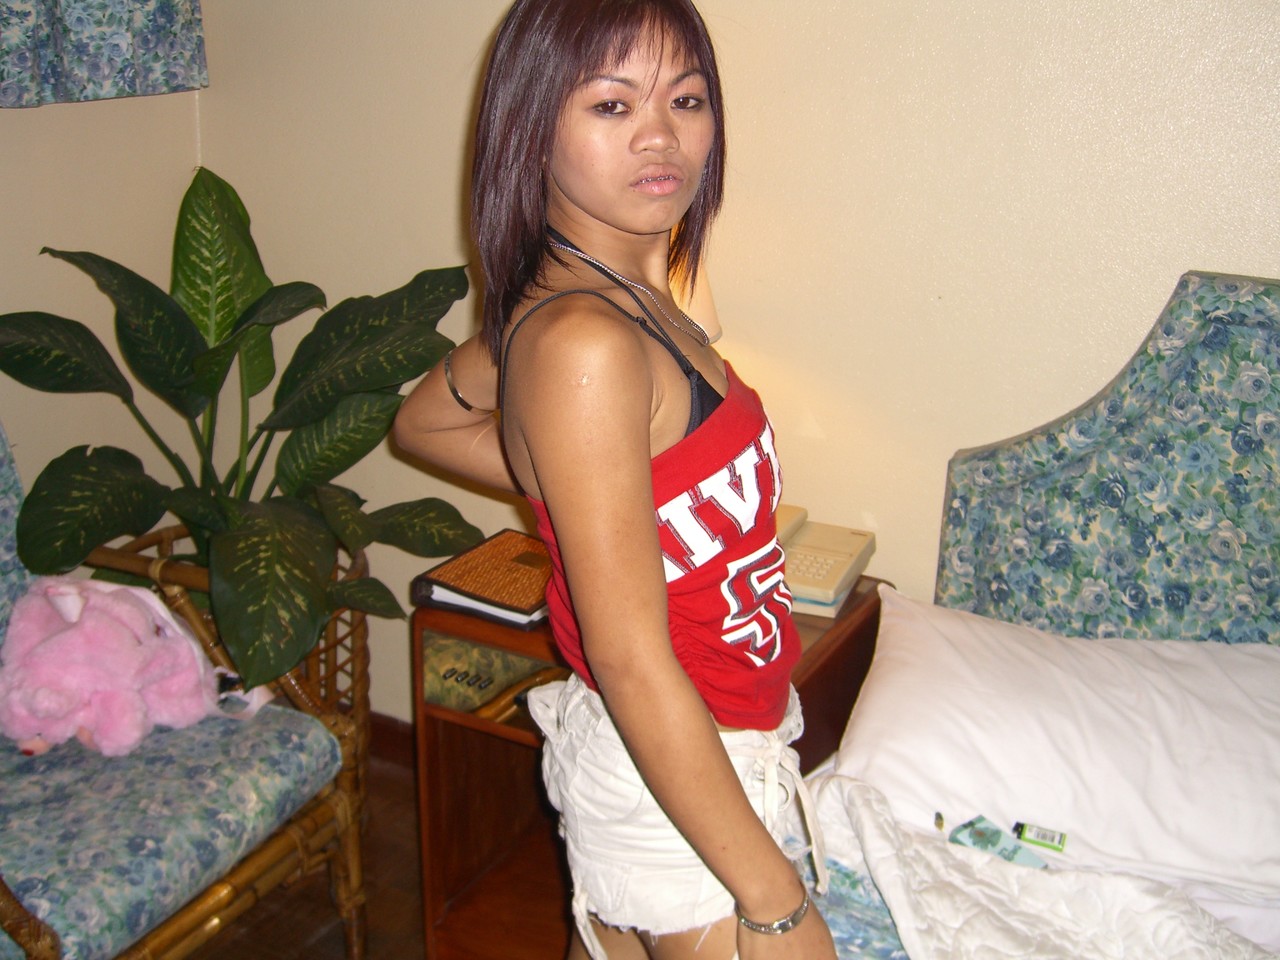 Filipina amateur licks her lips while getting totally naked on a bed foto porno #426918642 | Trike Patrol Pics, Asian, porno móvil